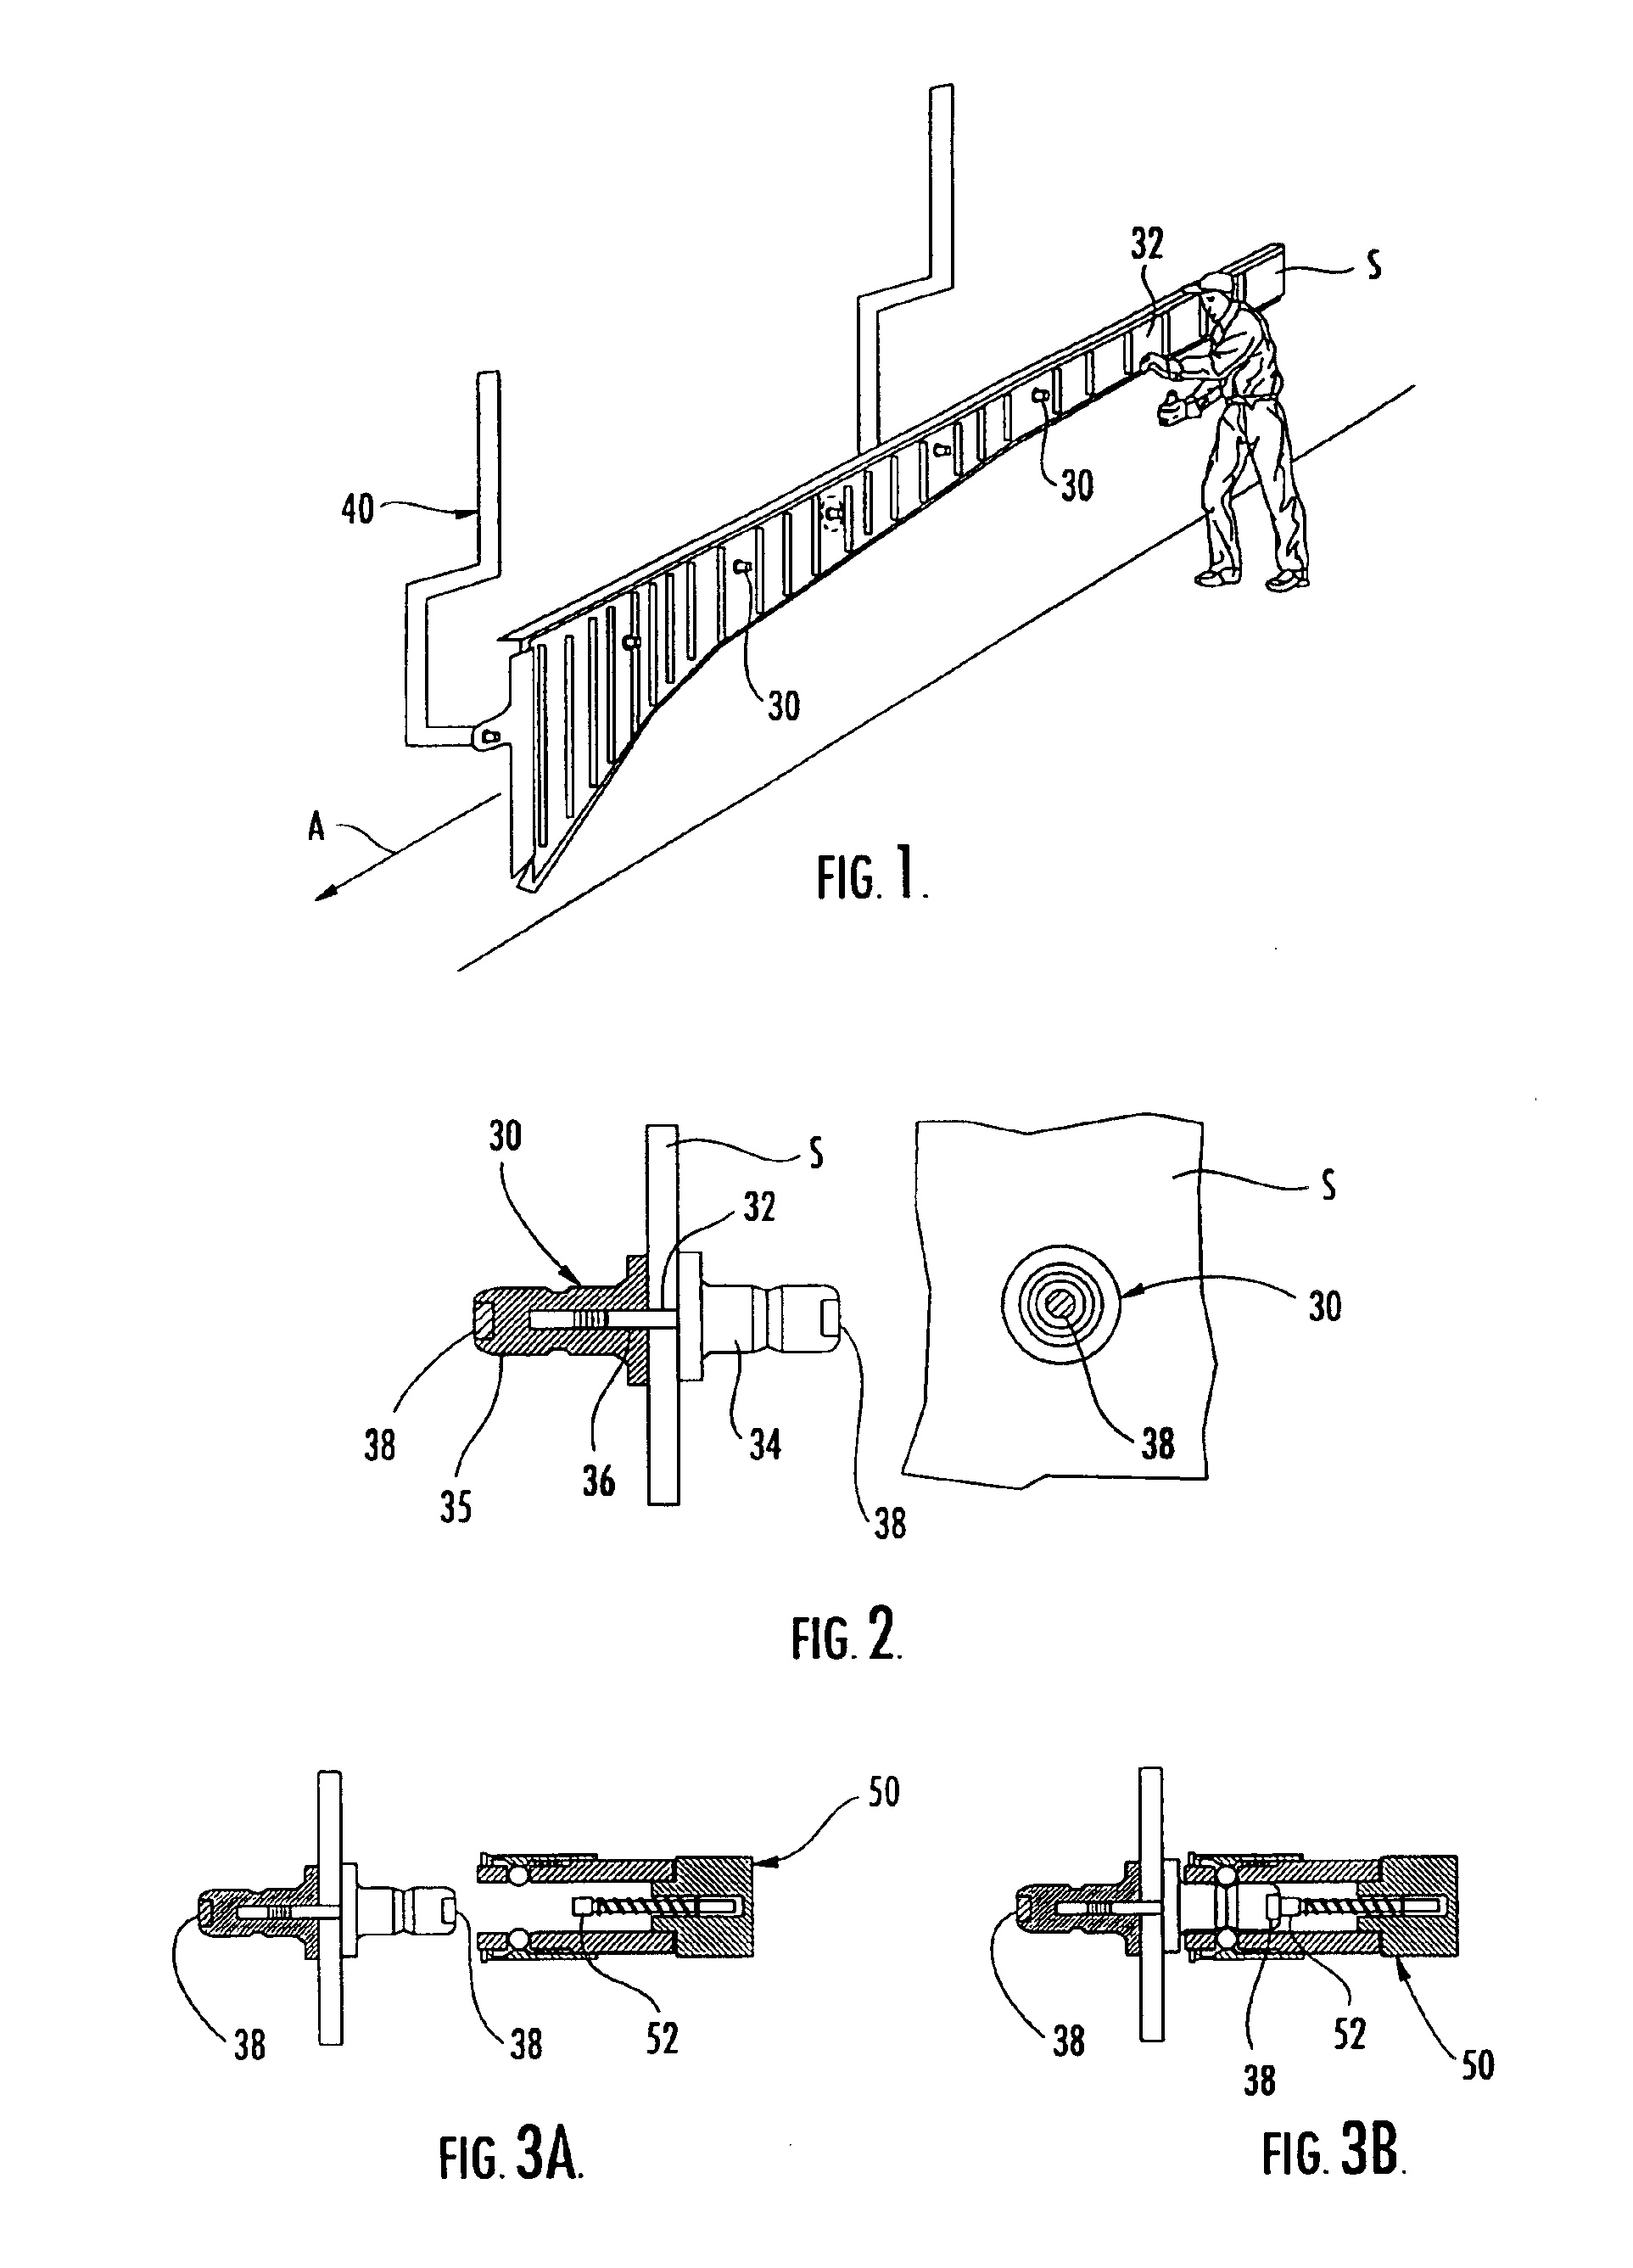 Manufacturing system for aircraft structures and other large structures